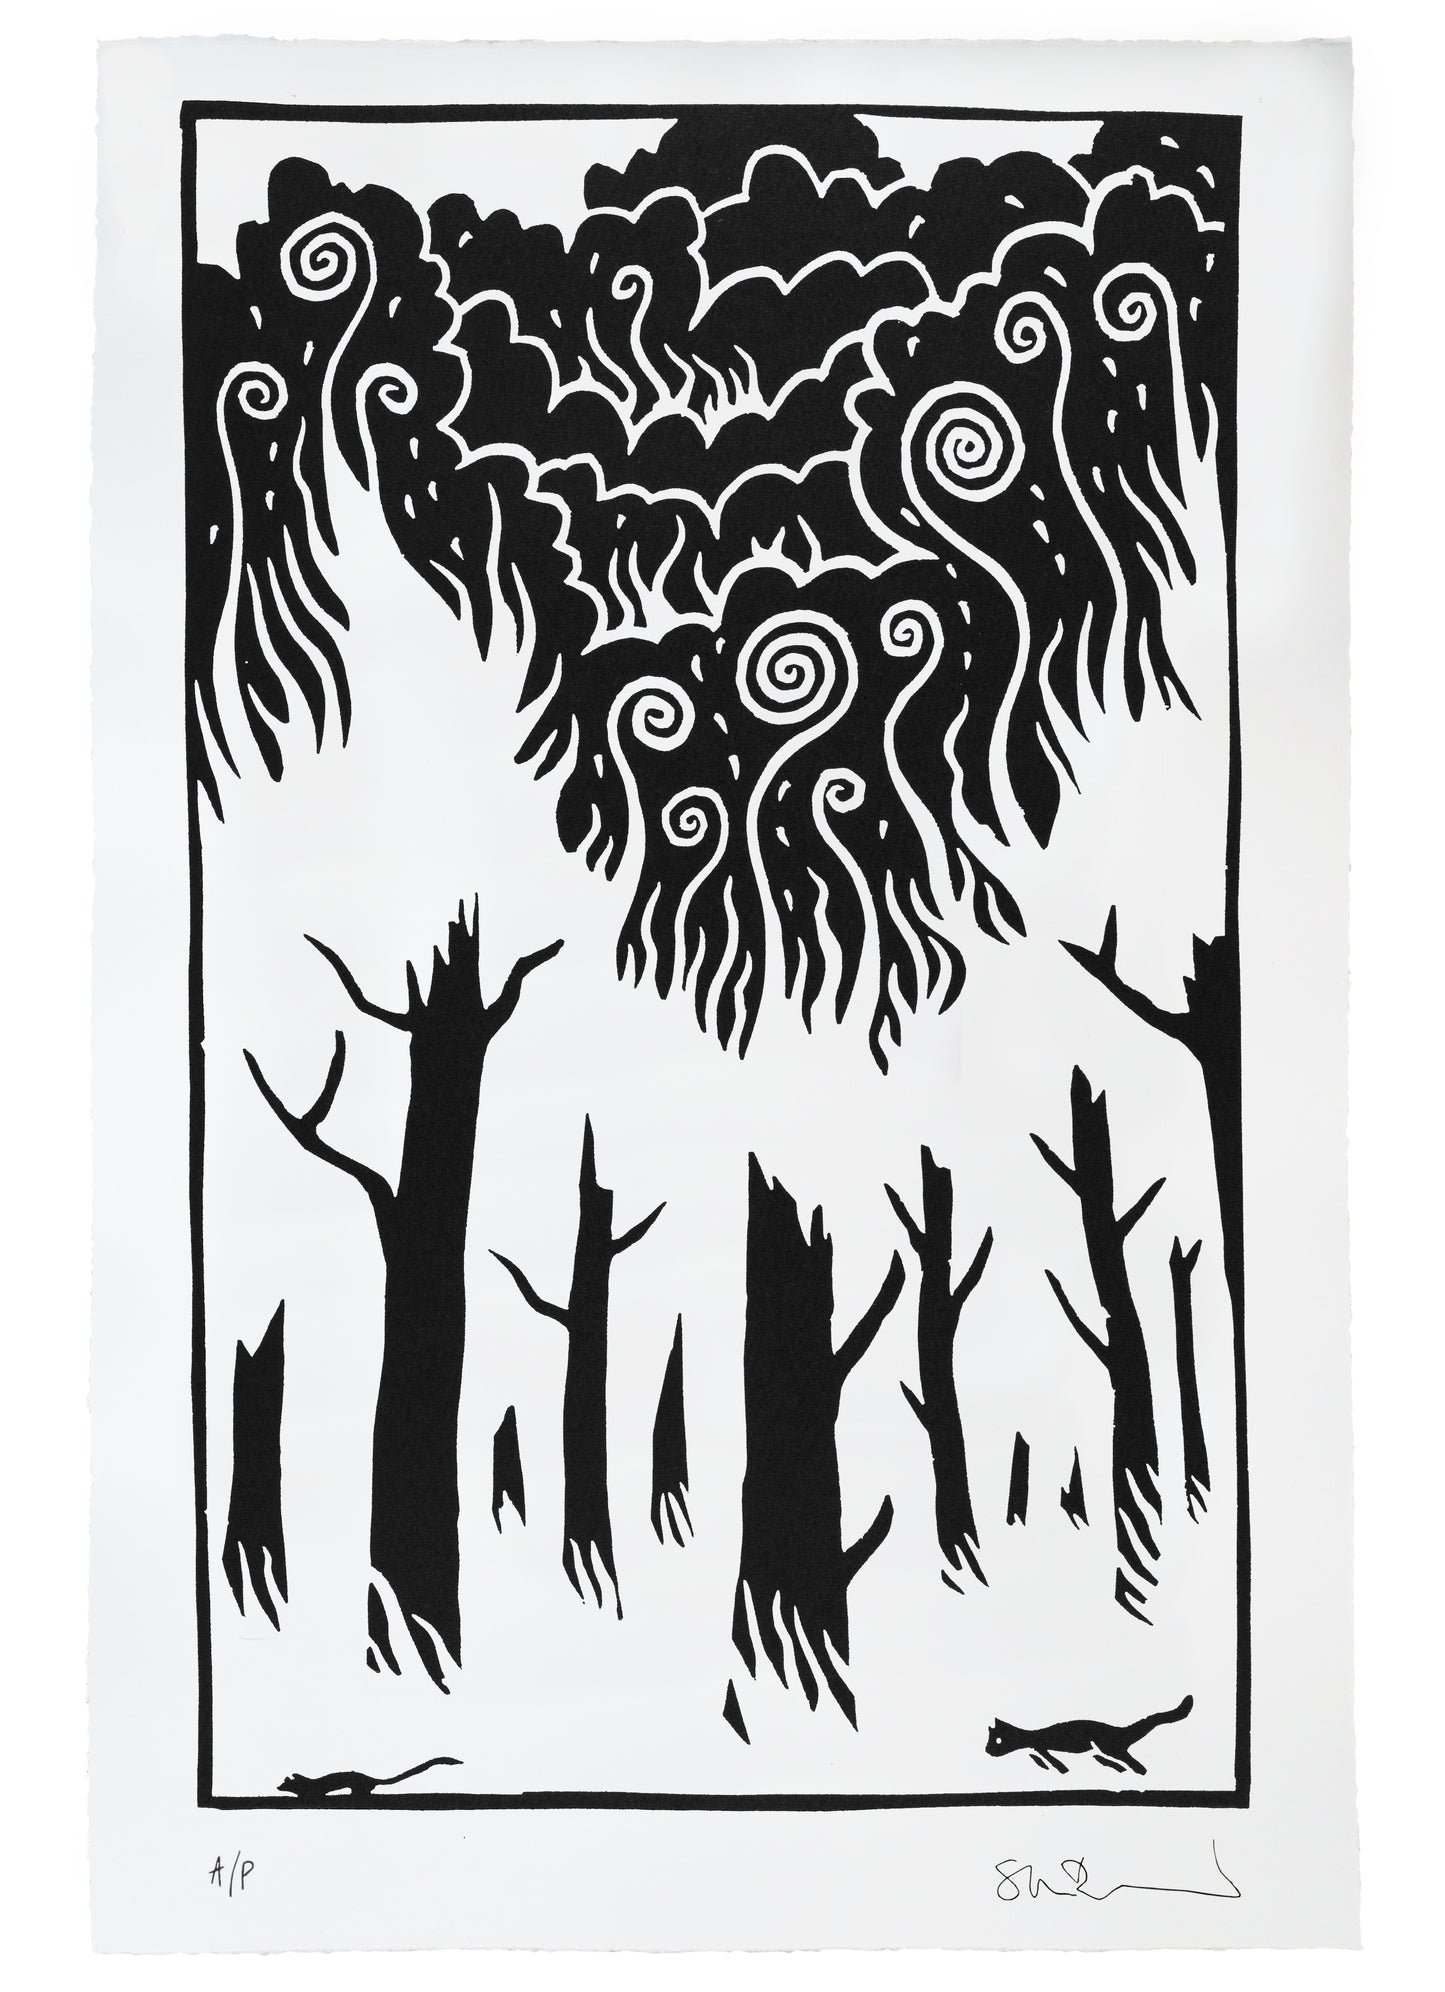 Stanley Donwood 'Ashes From Ashes' set